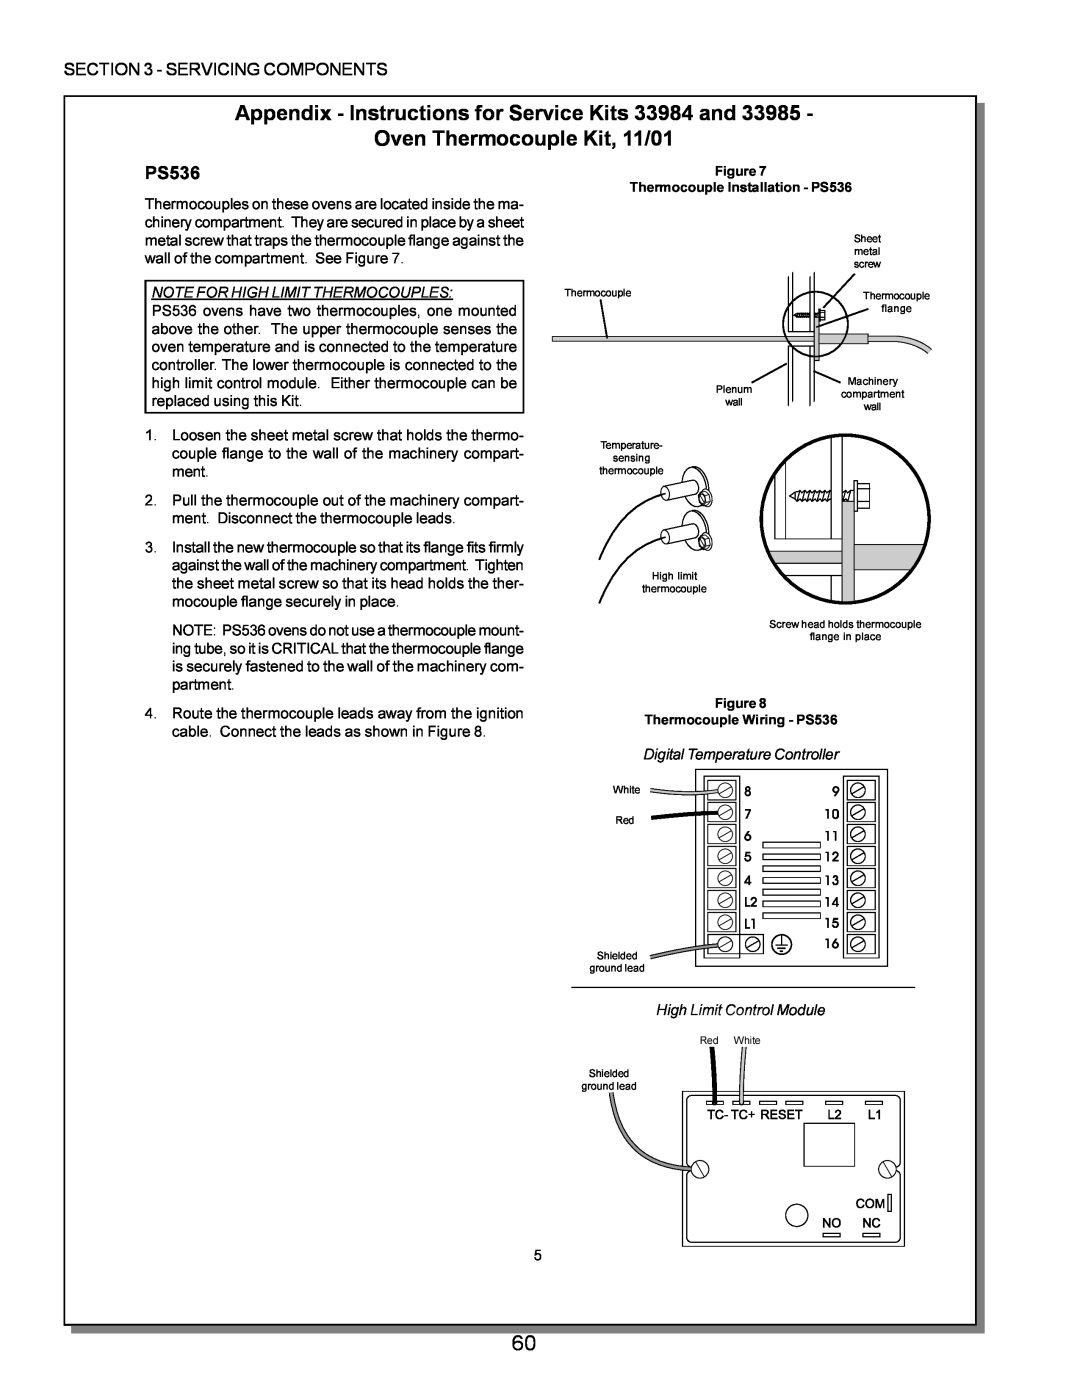 Middleby Marshall PS360, PS570 Appendix - Instructions for Service Kits 33984 and, Oven Thermocouple Kit, 11/01, PS536 